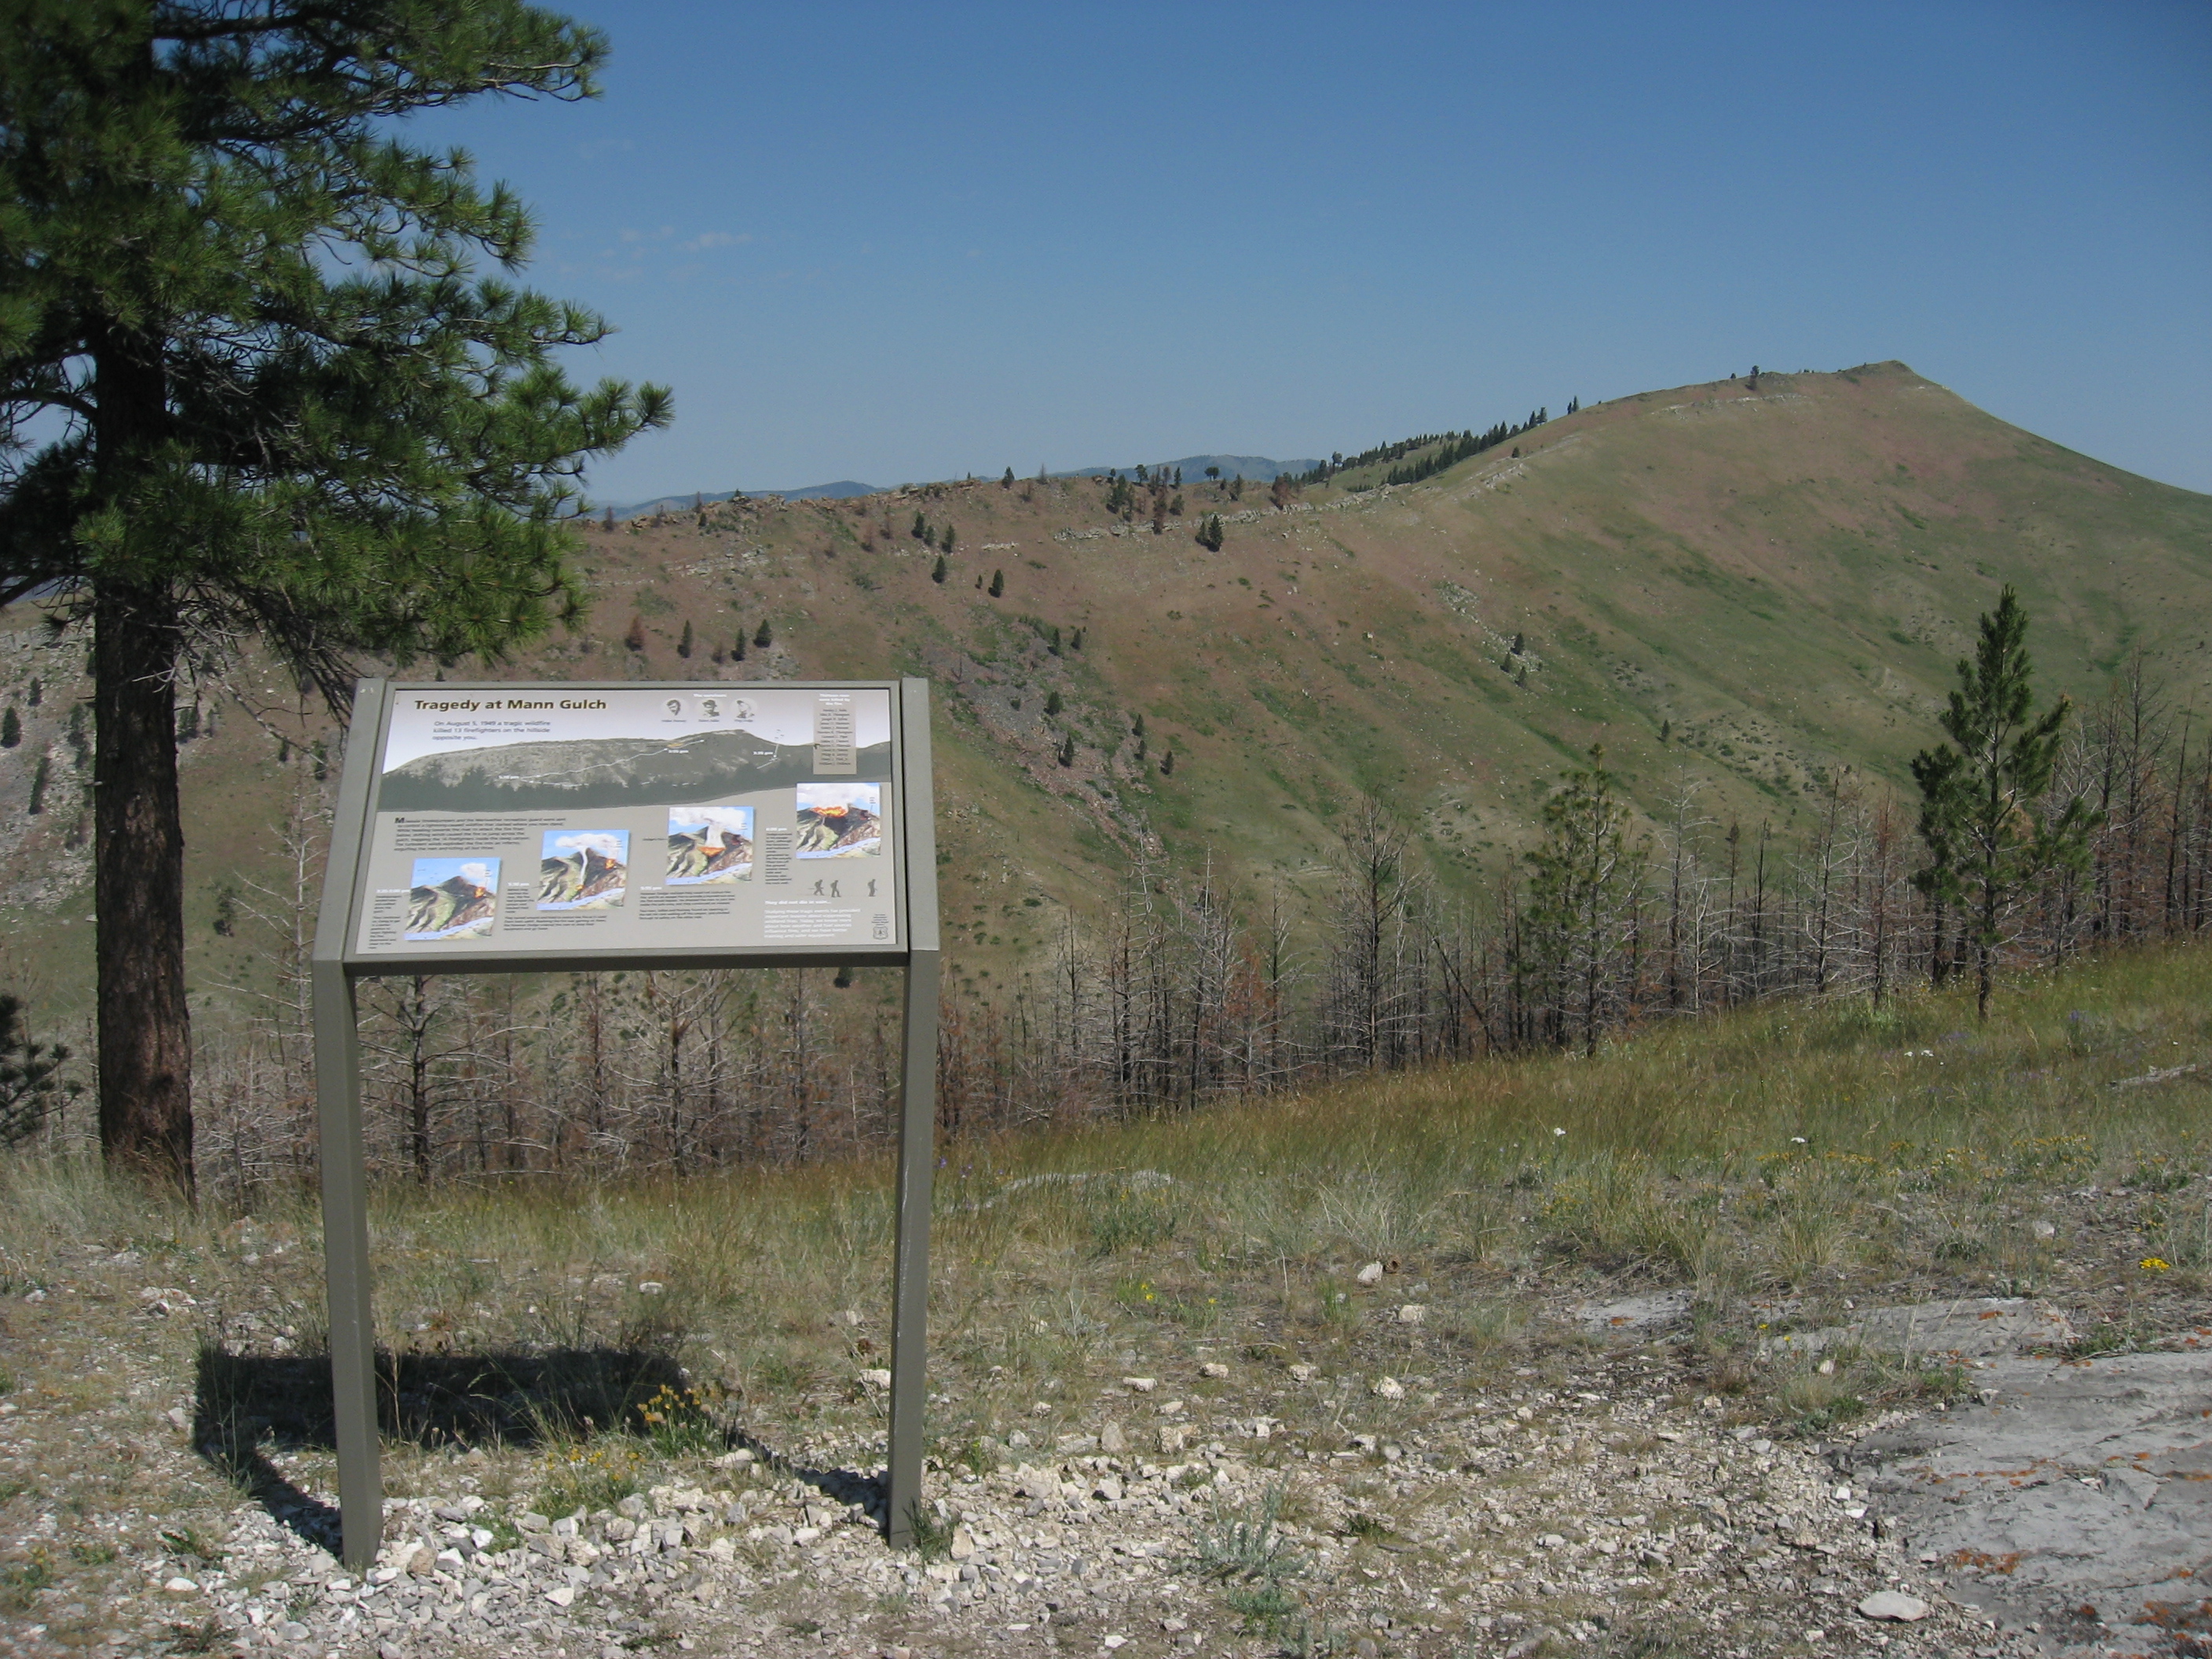 The view from the ridge opposite of where the smokejumpers were killed. Click on the photo to read the interpretive sign showing the timeline of events at Mann Gulch.